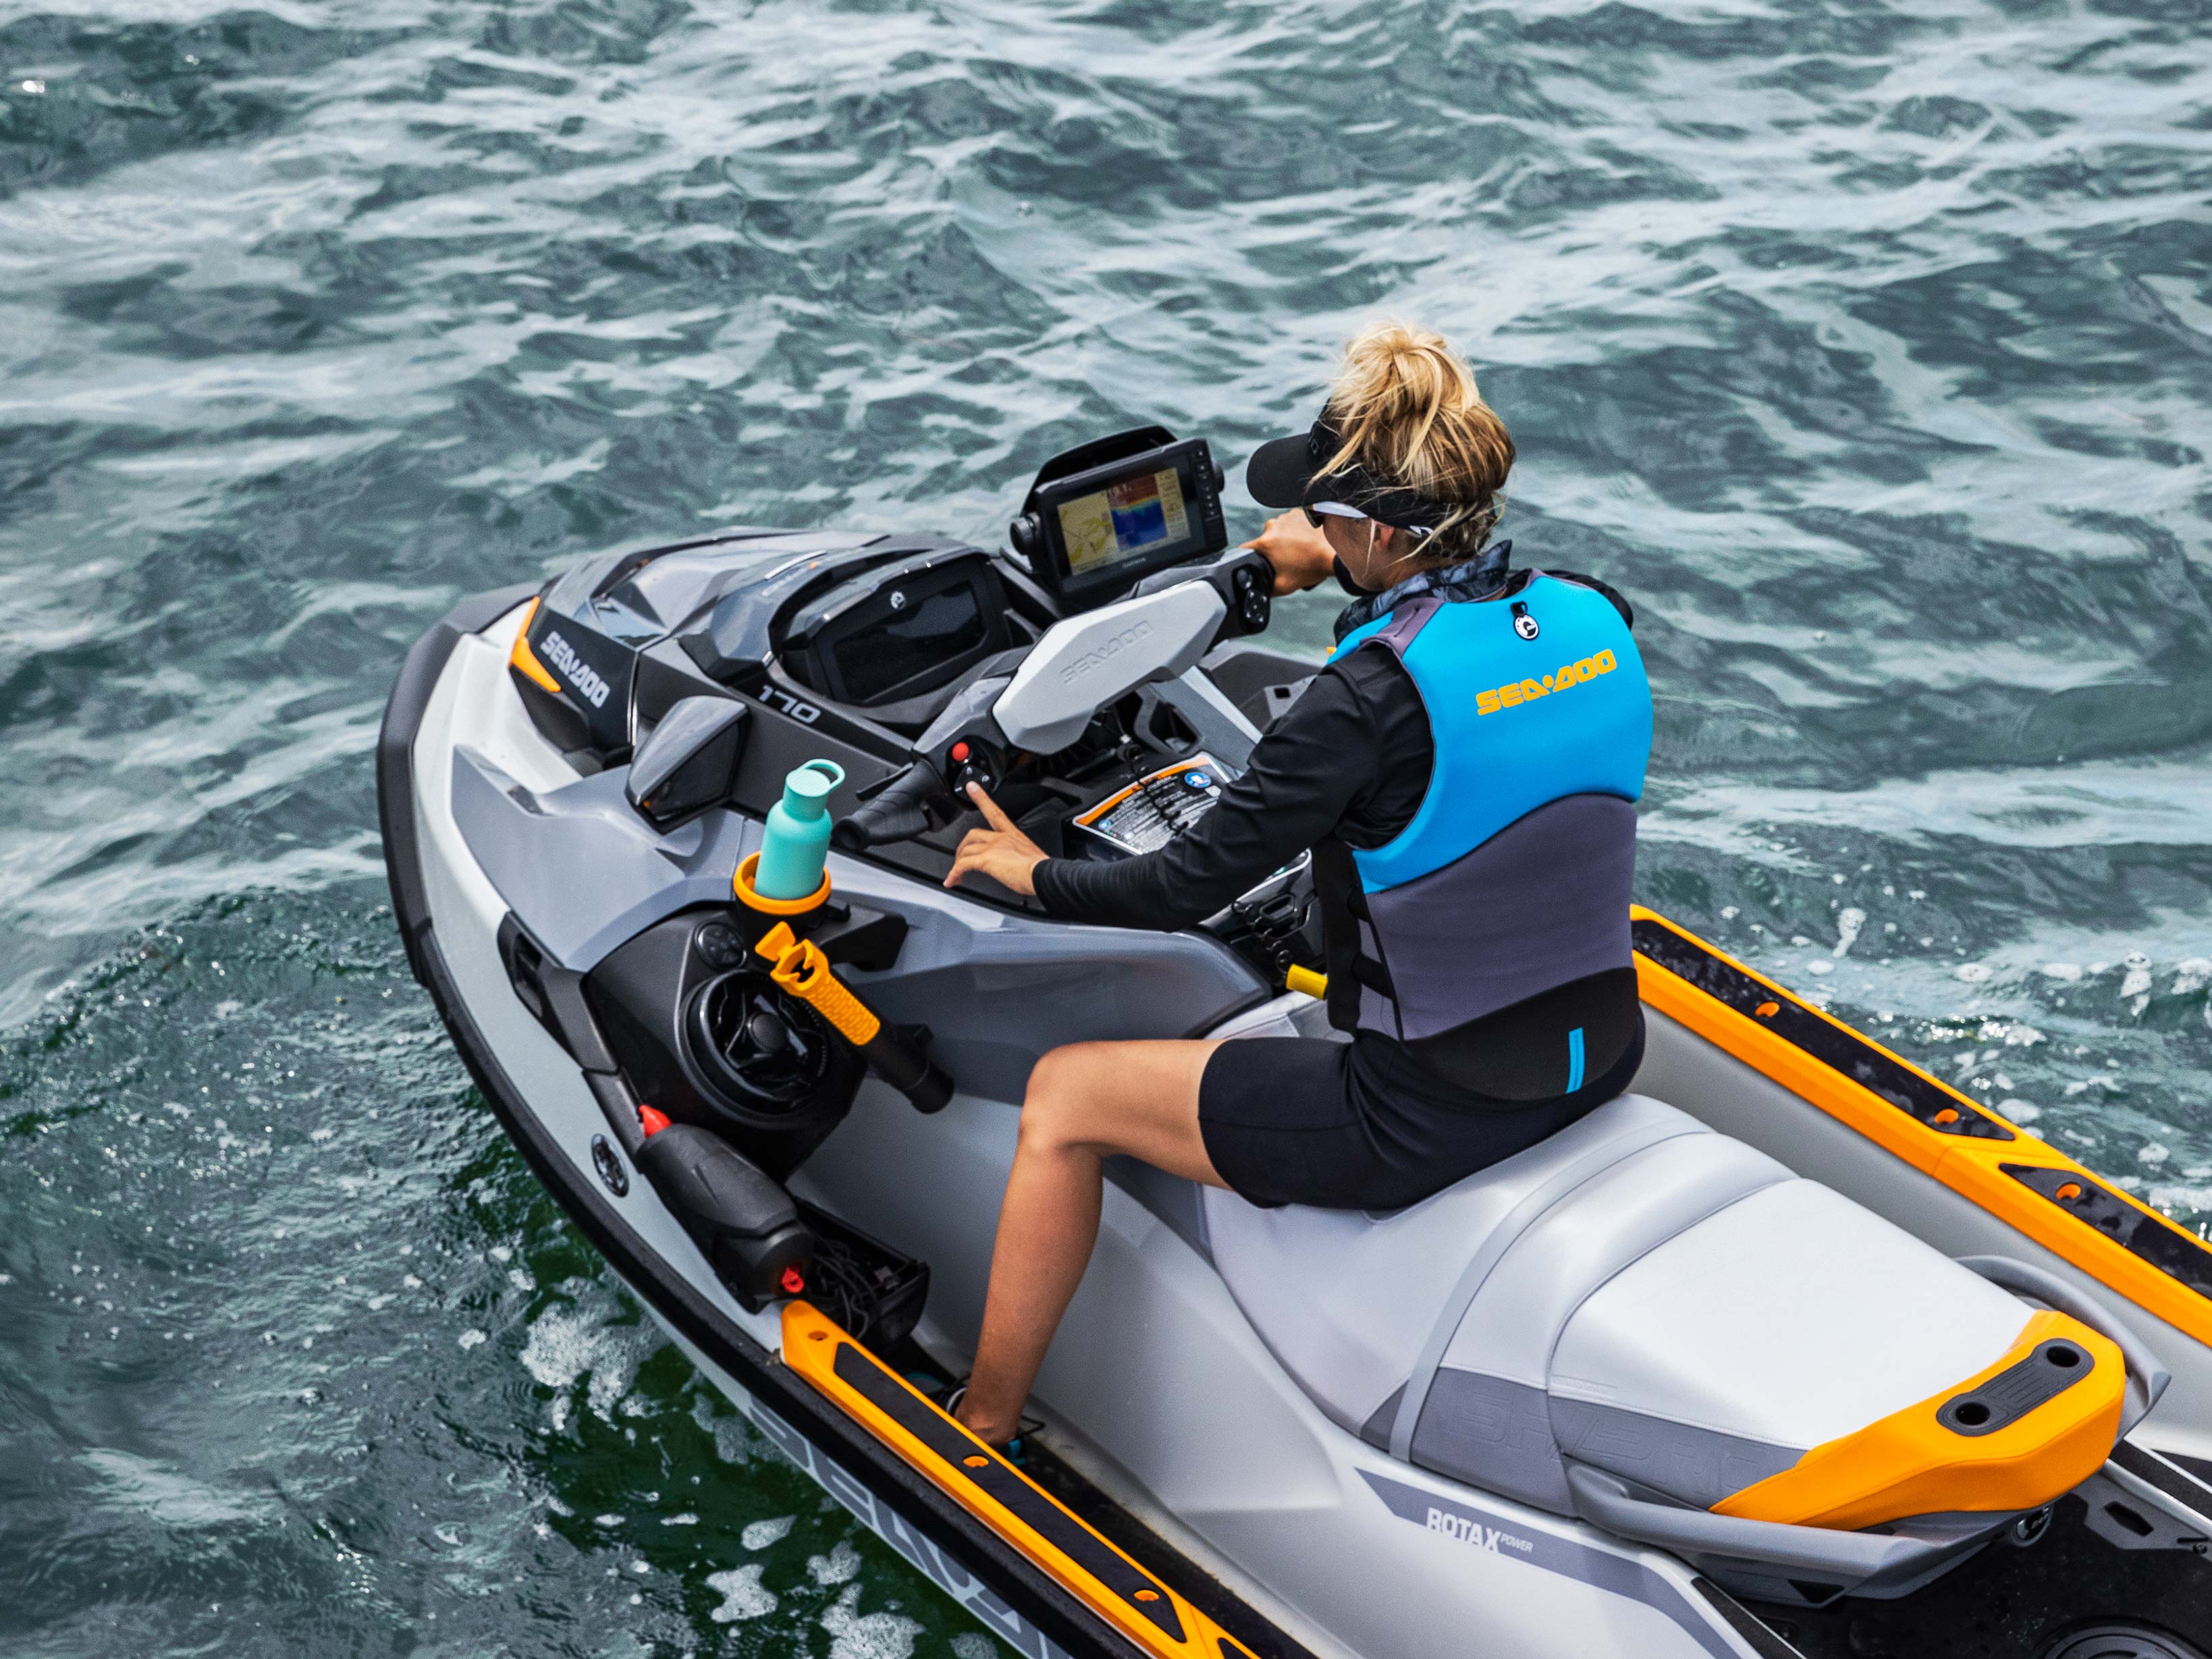 Touchscreen display of the Sea-Doo Switch